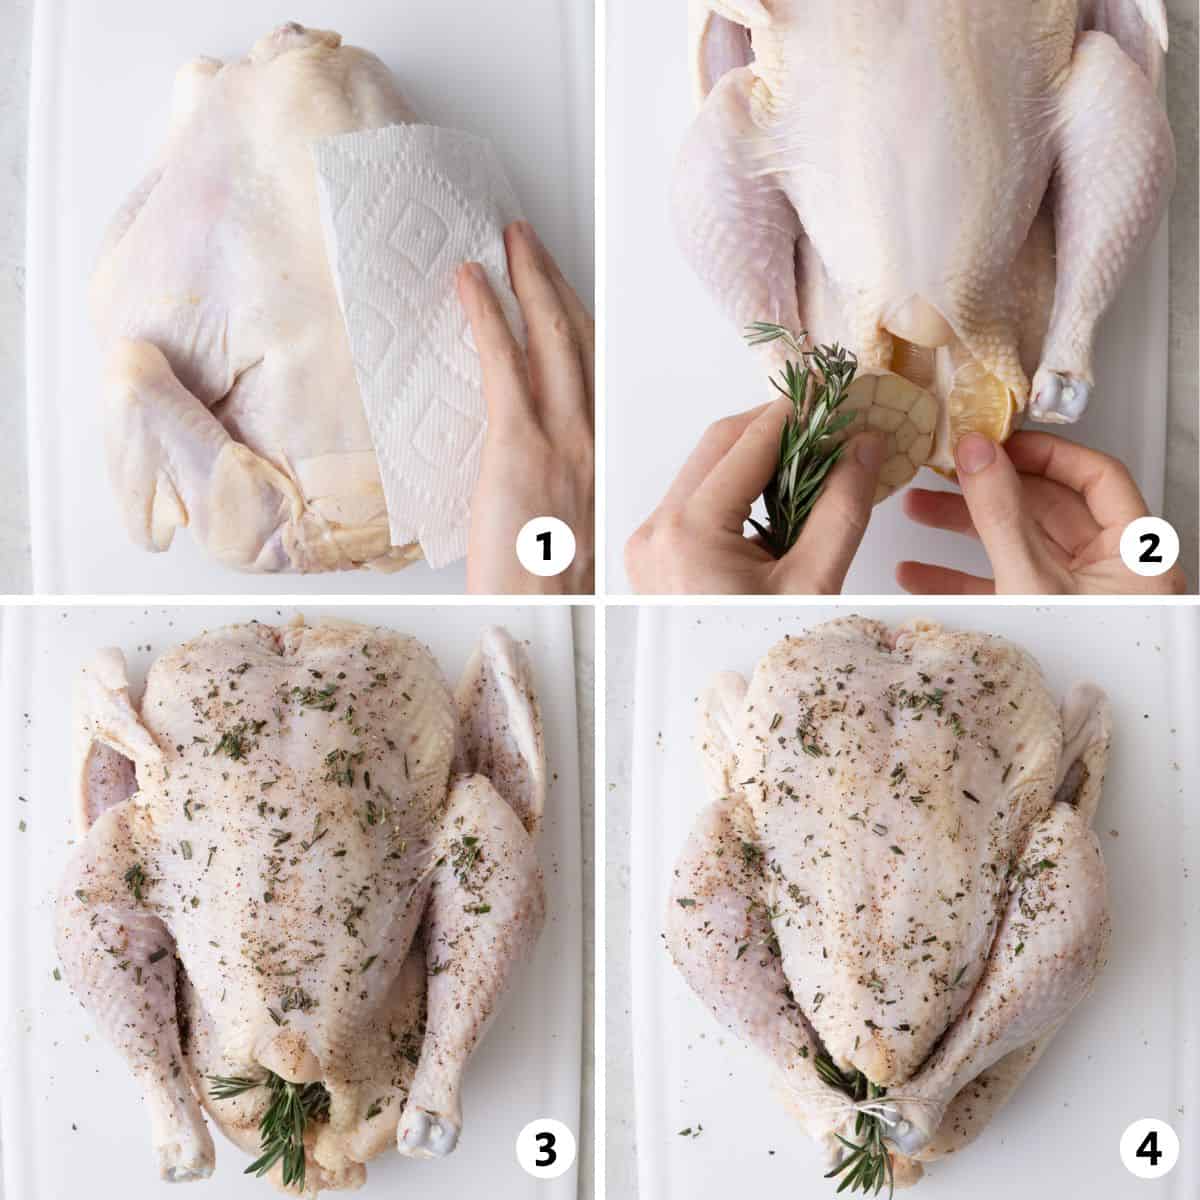 4 image collage preparing whole chicken on a cutting board: 1- patting dry with paper towels, 2- adding rosemary, garlic, and lemon to the cavity, 3- salt, pepper and rosemary added to skin, 4- legs tied with twine and wings tucked.